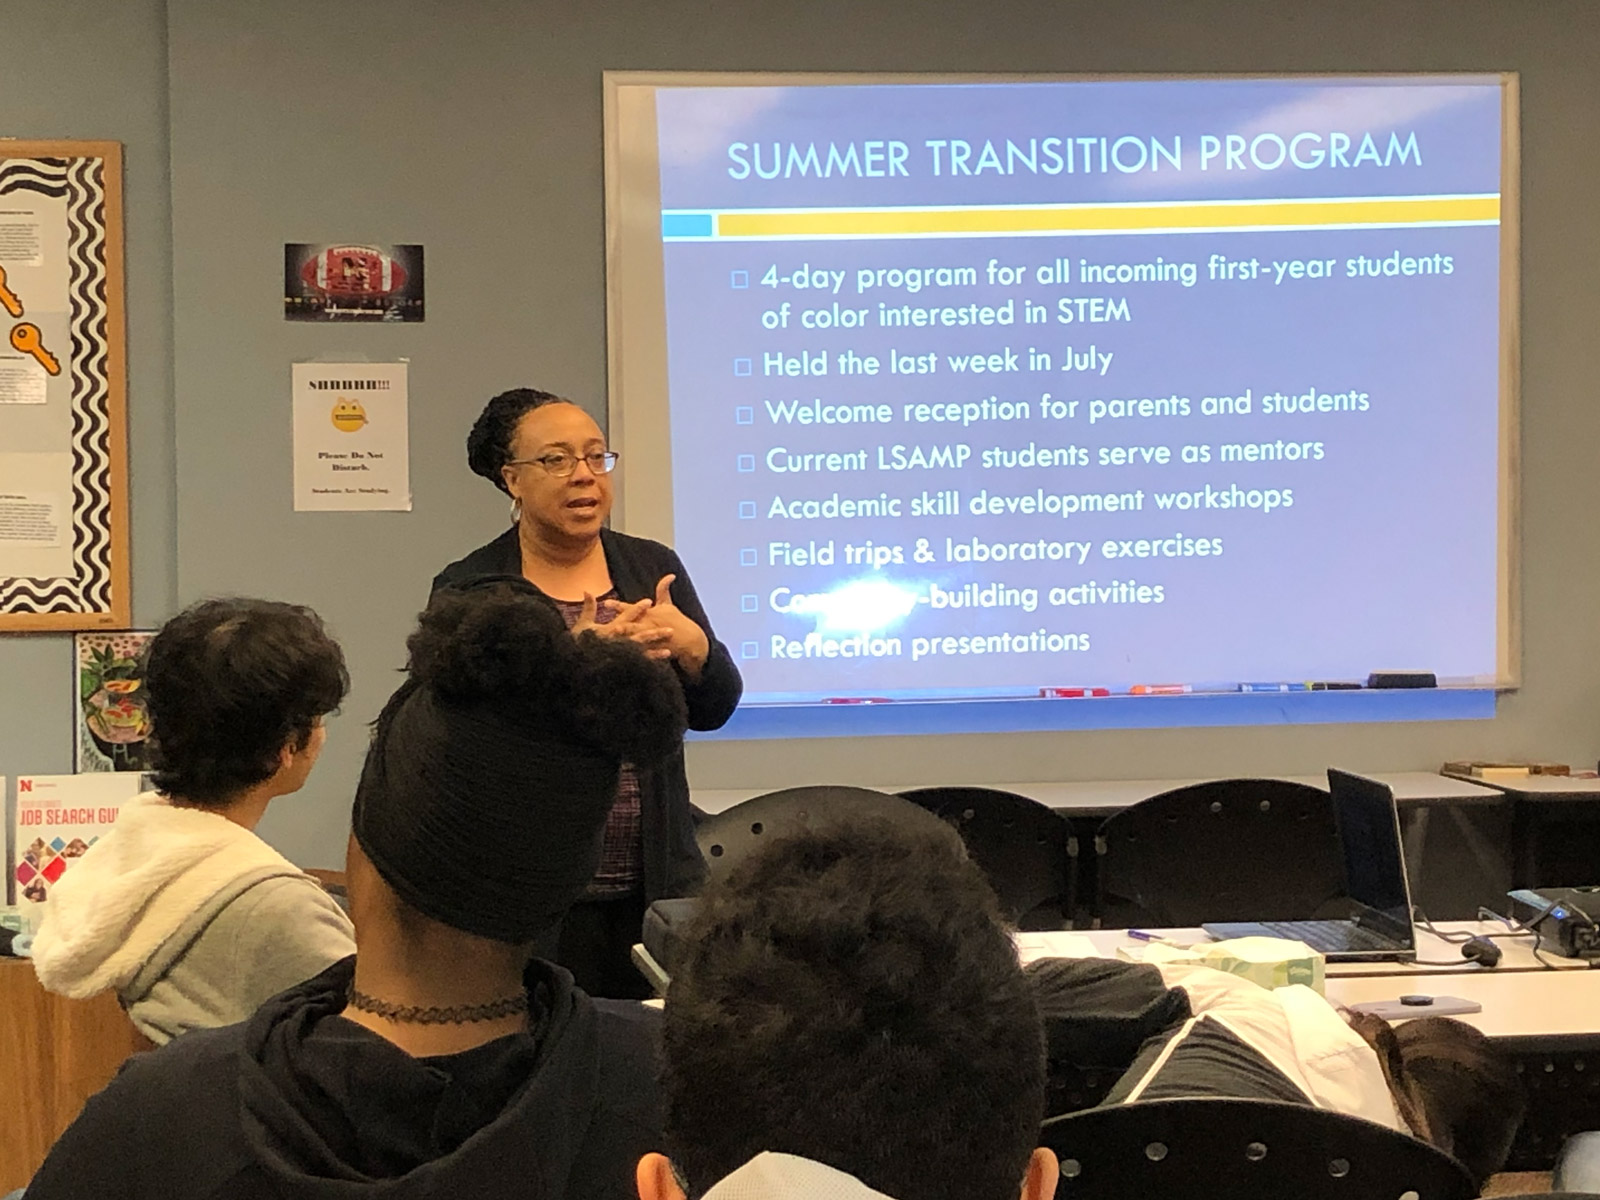 Instructor provides overview of summer transition program in classroom environment